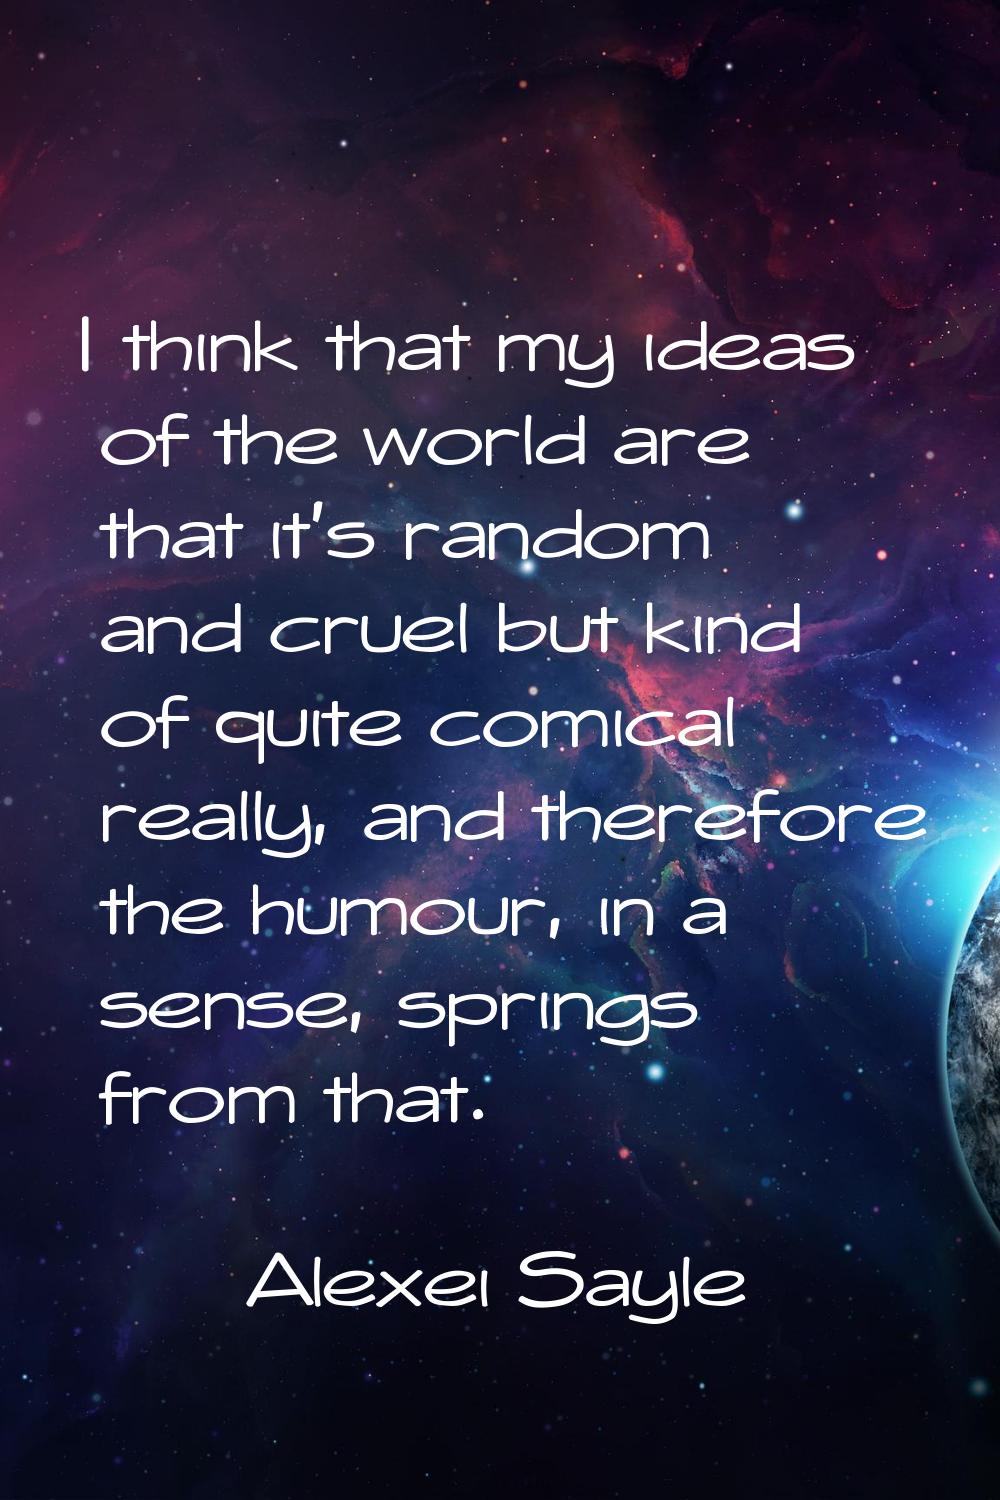 I think that my ideas of the world are that it's random and cruel but kind of quite comical really,